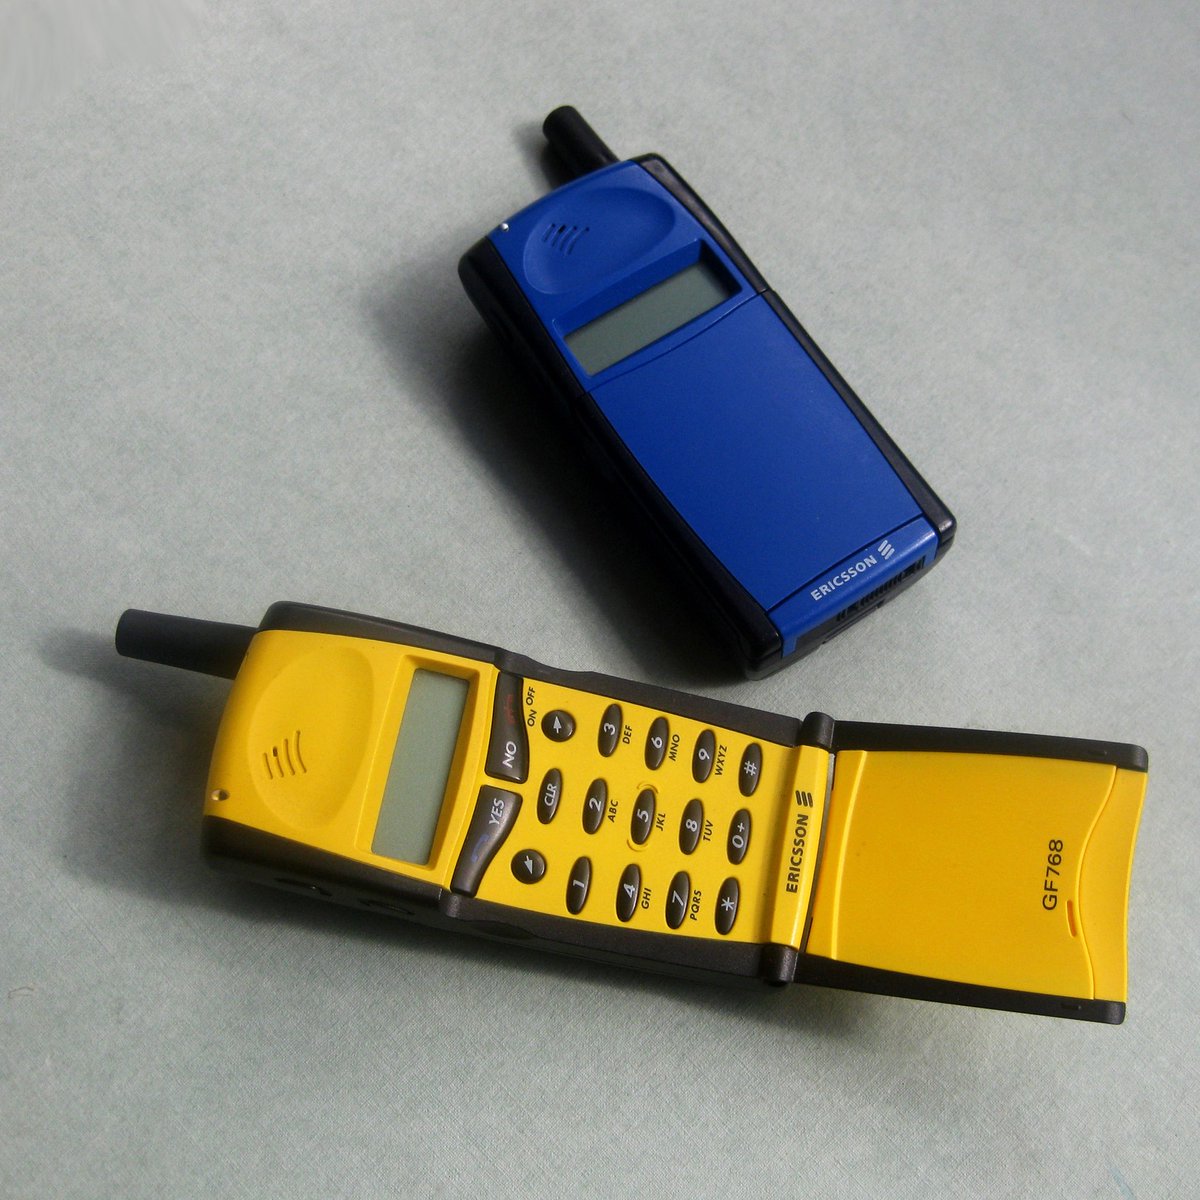 The Ericsson gf768, 1997Im posting this one as I loved mine so much, together with my armband sony radio they were my bright-yellow kit for urban life as a teen...